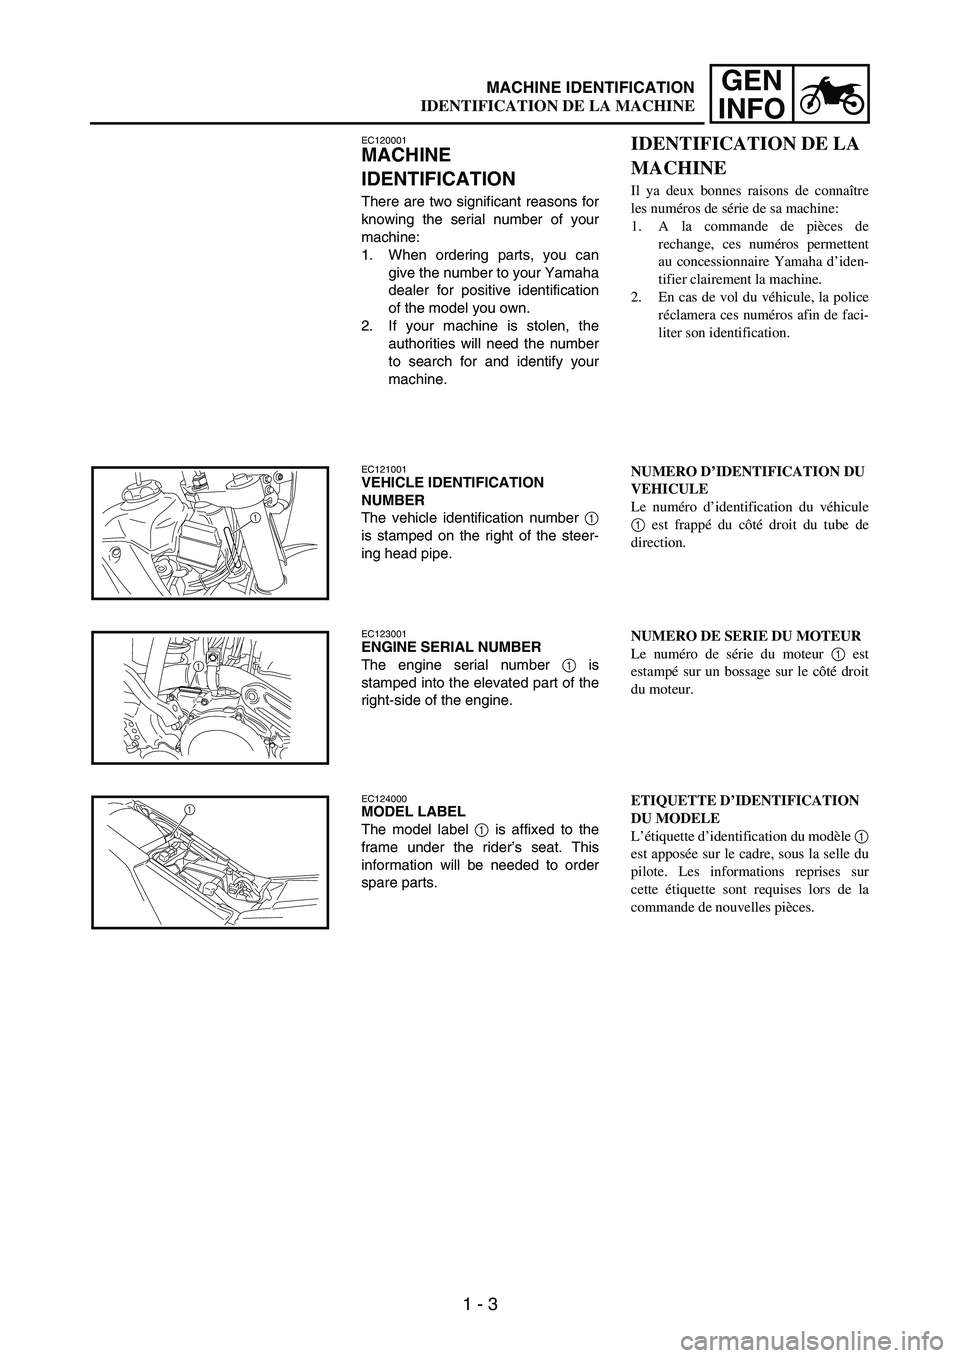 YAMAHA WR 250F 2004  Manuale de Empleo (in Spanish) 1 - 3
GEN
INFOMACHINE IDENTIFICATION
EC120001
MACHINE 
IDENTIFICATION
There are two significant reasons for
knowing the serial number of your
machine:
1. When ordering parts, you can
give the number t